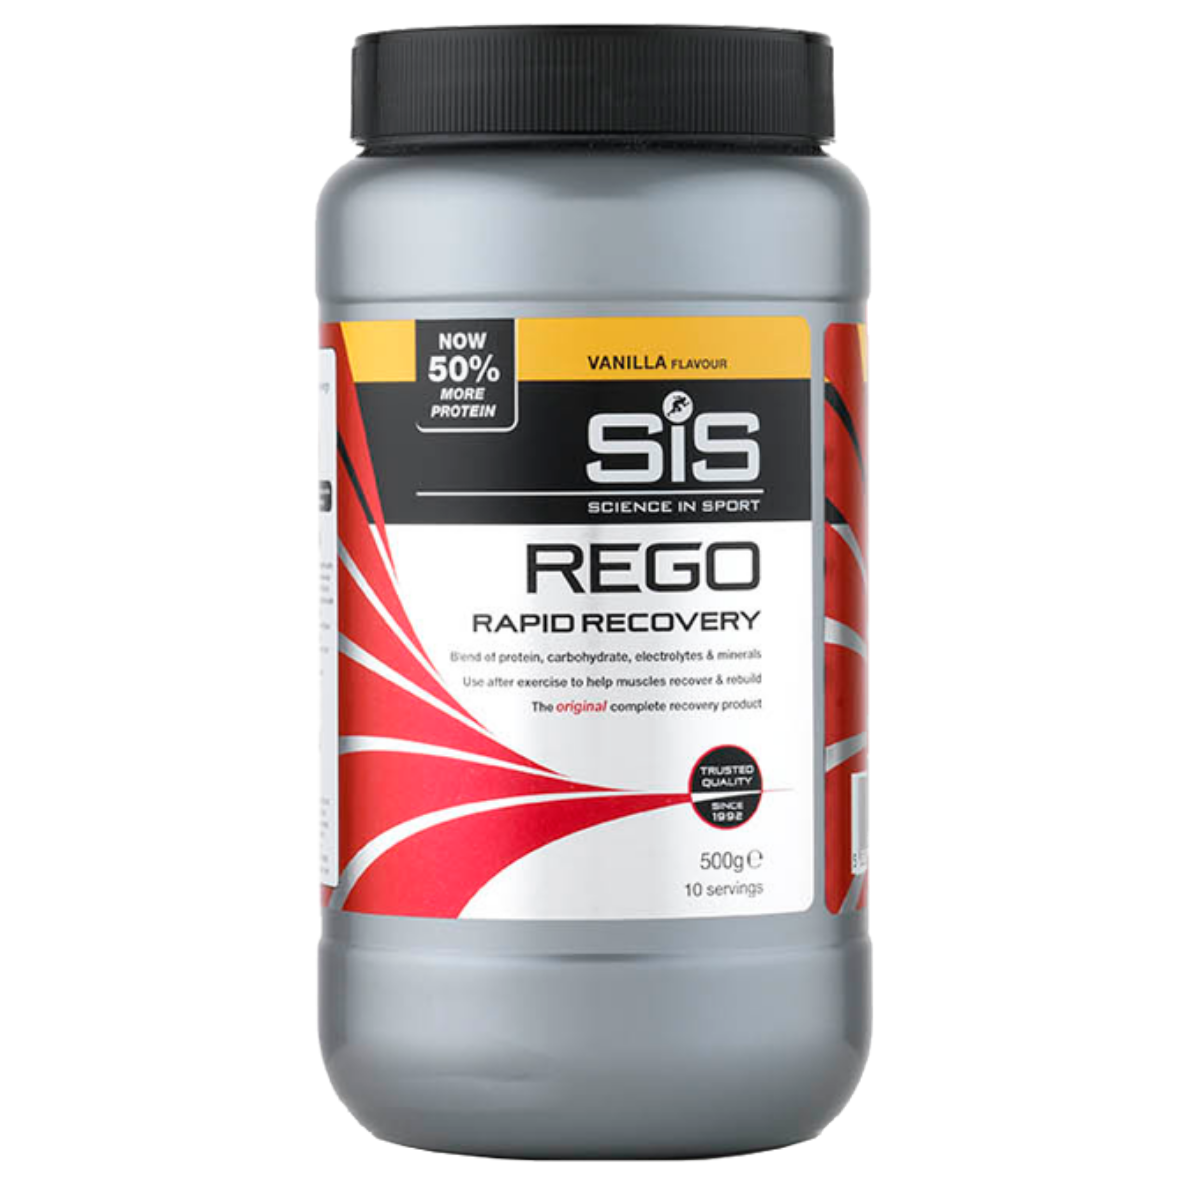 Science in Sport REGO Rapid Recovery Vanilla Protein